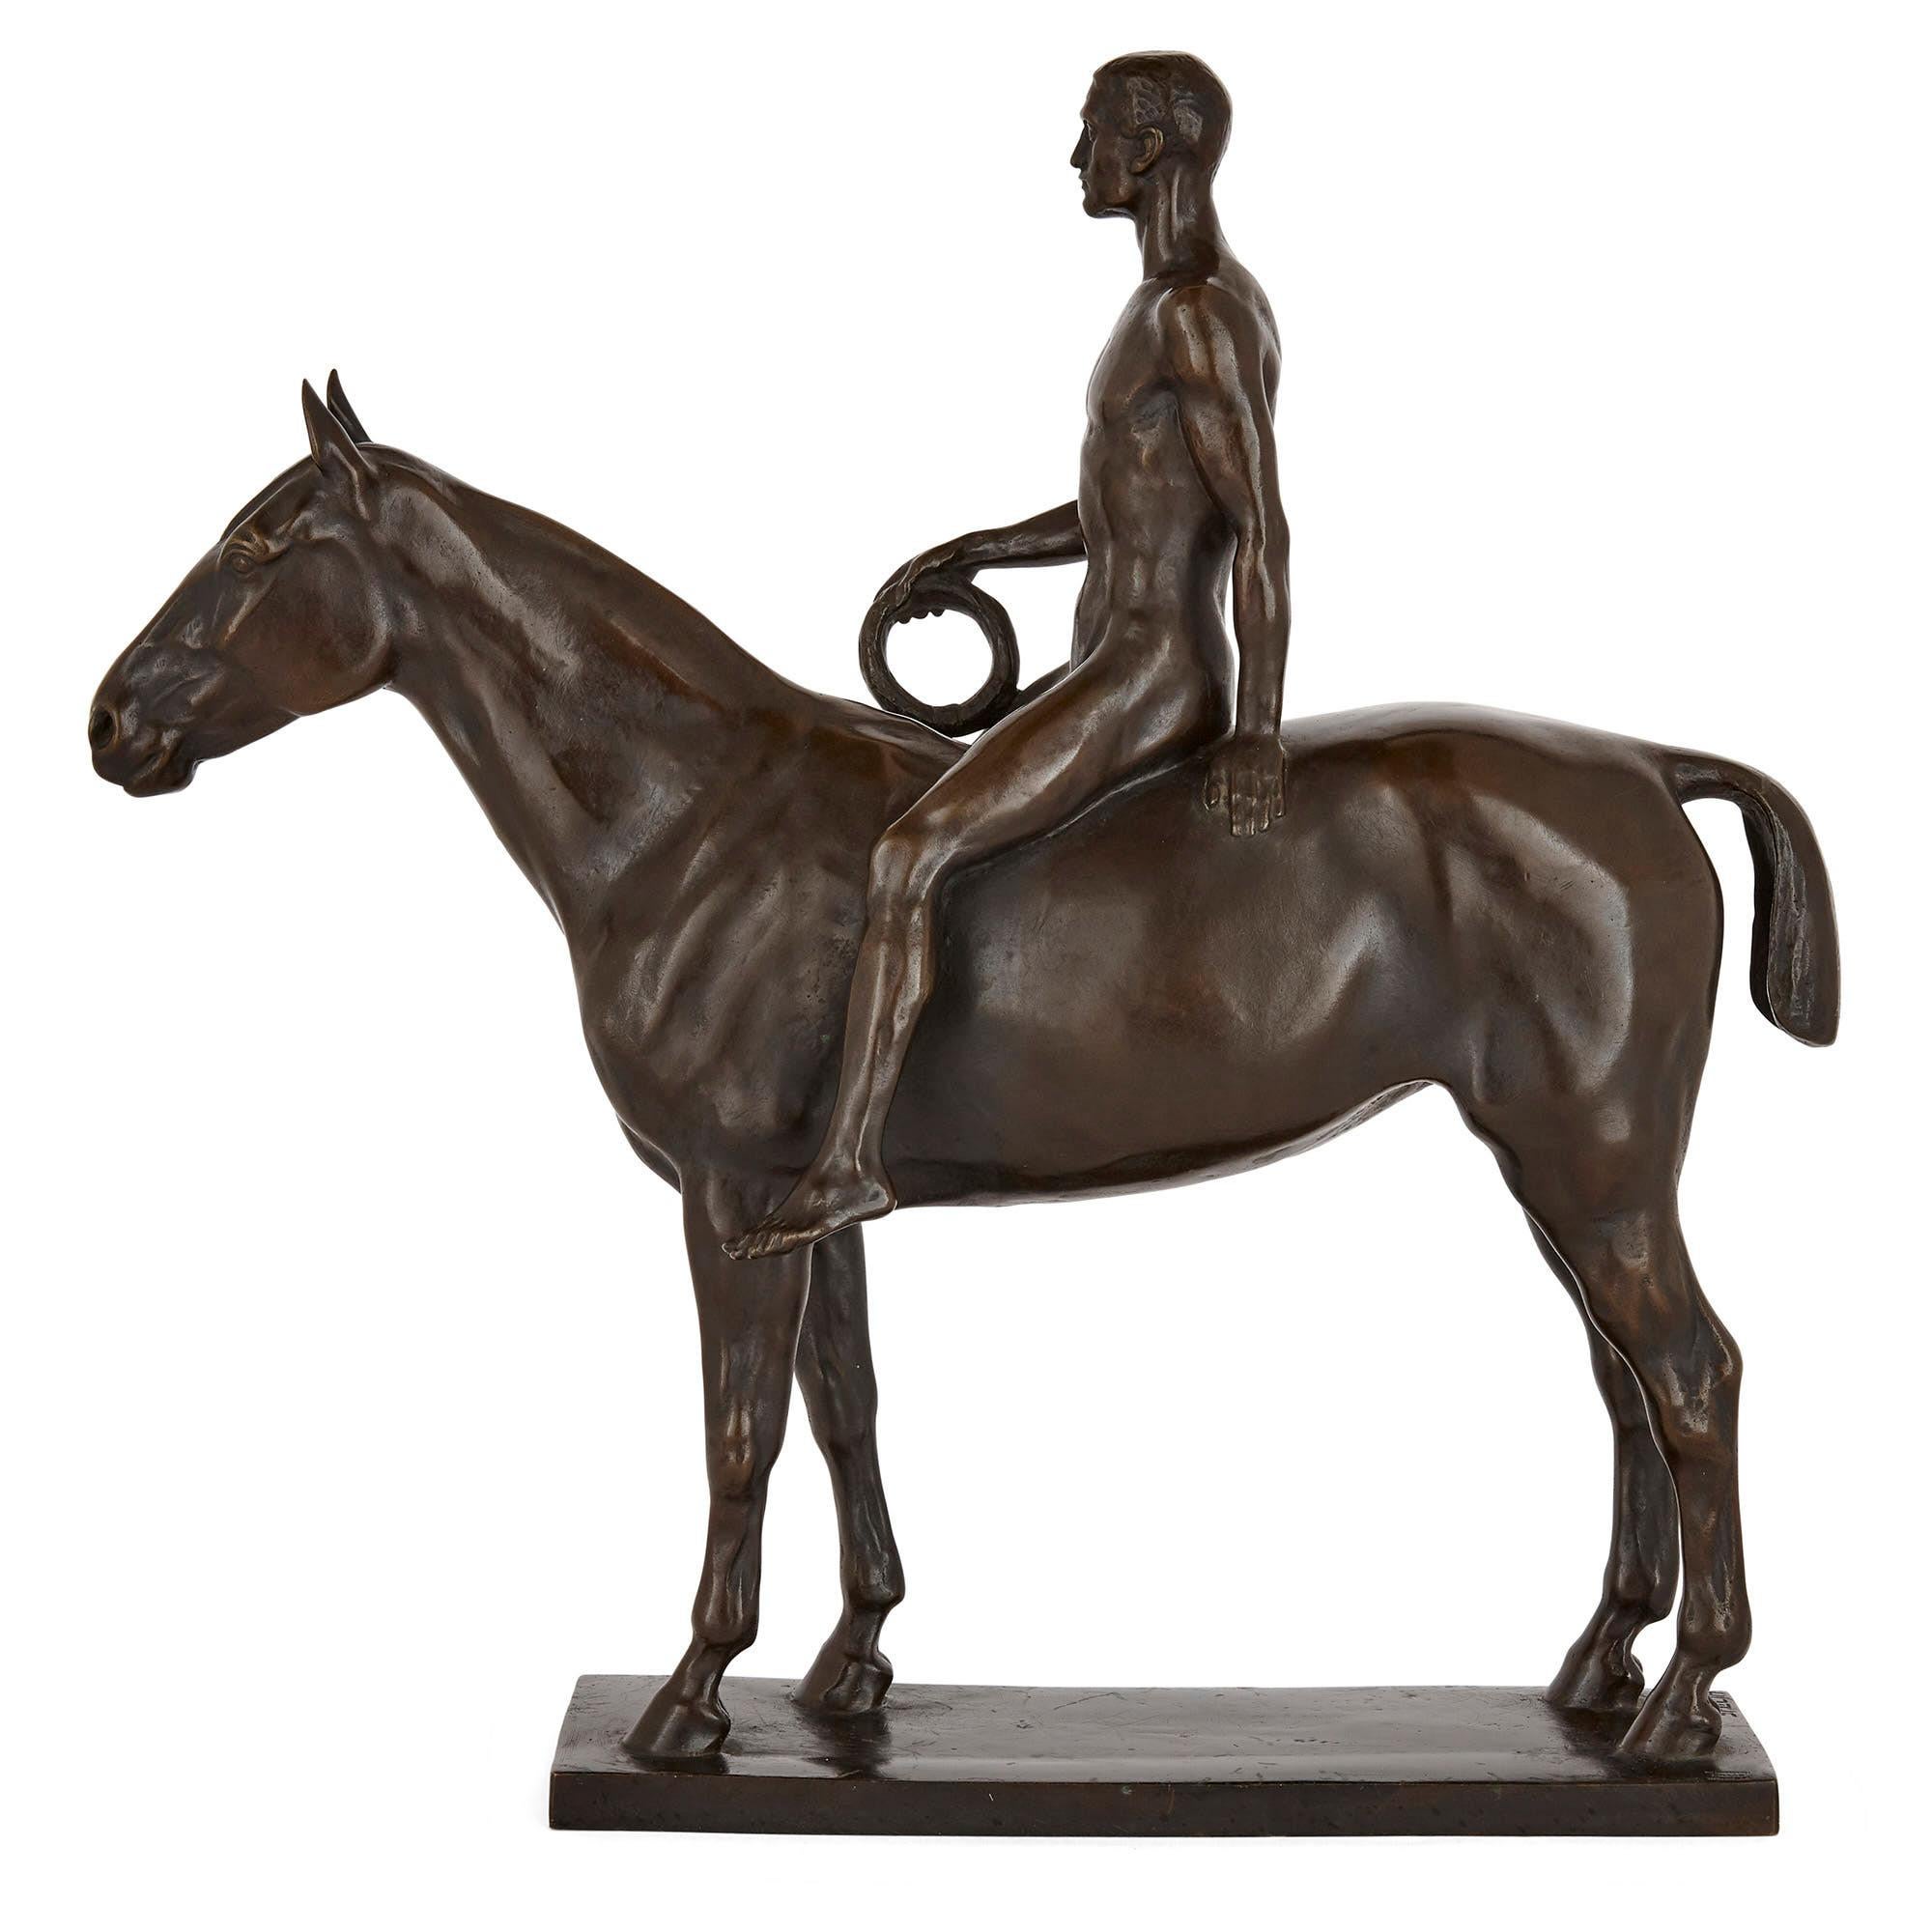 Known as the ‘Olympic Rider’, this patinated bronze group of a man upon a horse is by the German artist Heinrich Splieth. The design is simple yet restrained and refined: an ideal man portrayed in the nude, holding a laurel wreath, is seated on a